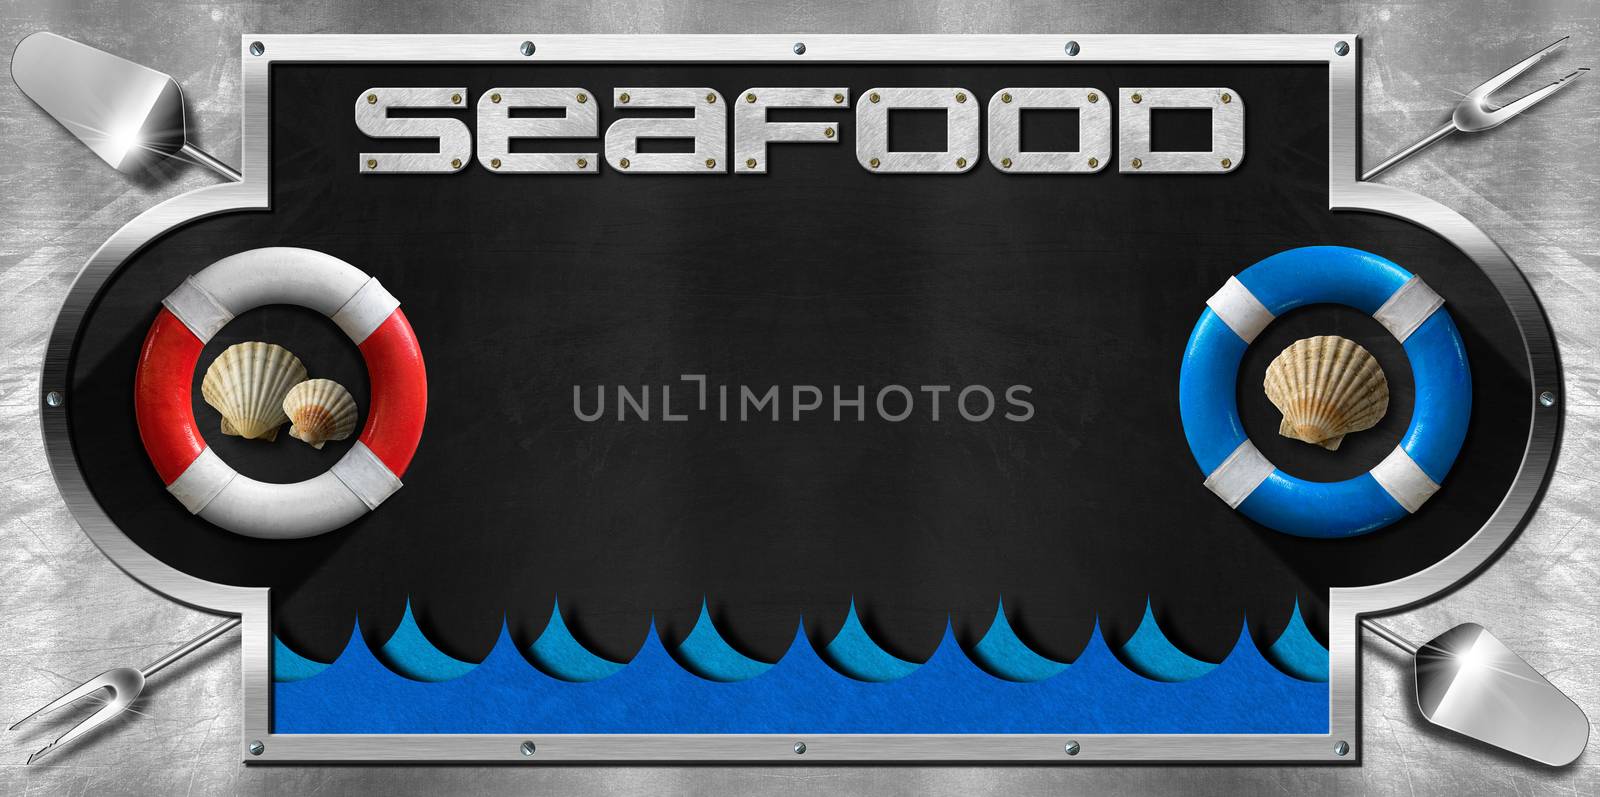 Blackboard for Seafood Menu by catalby